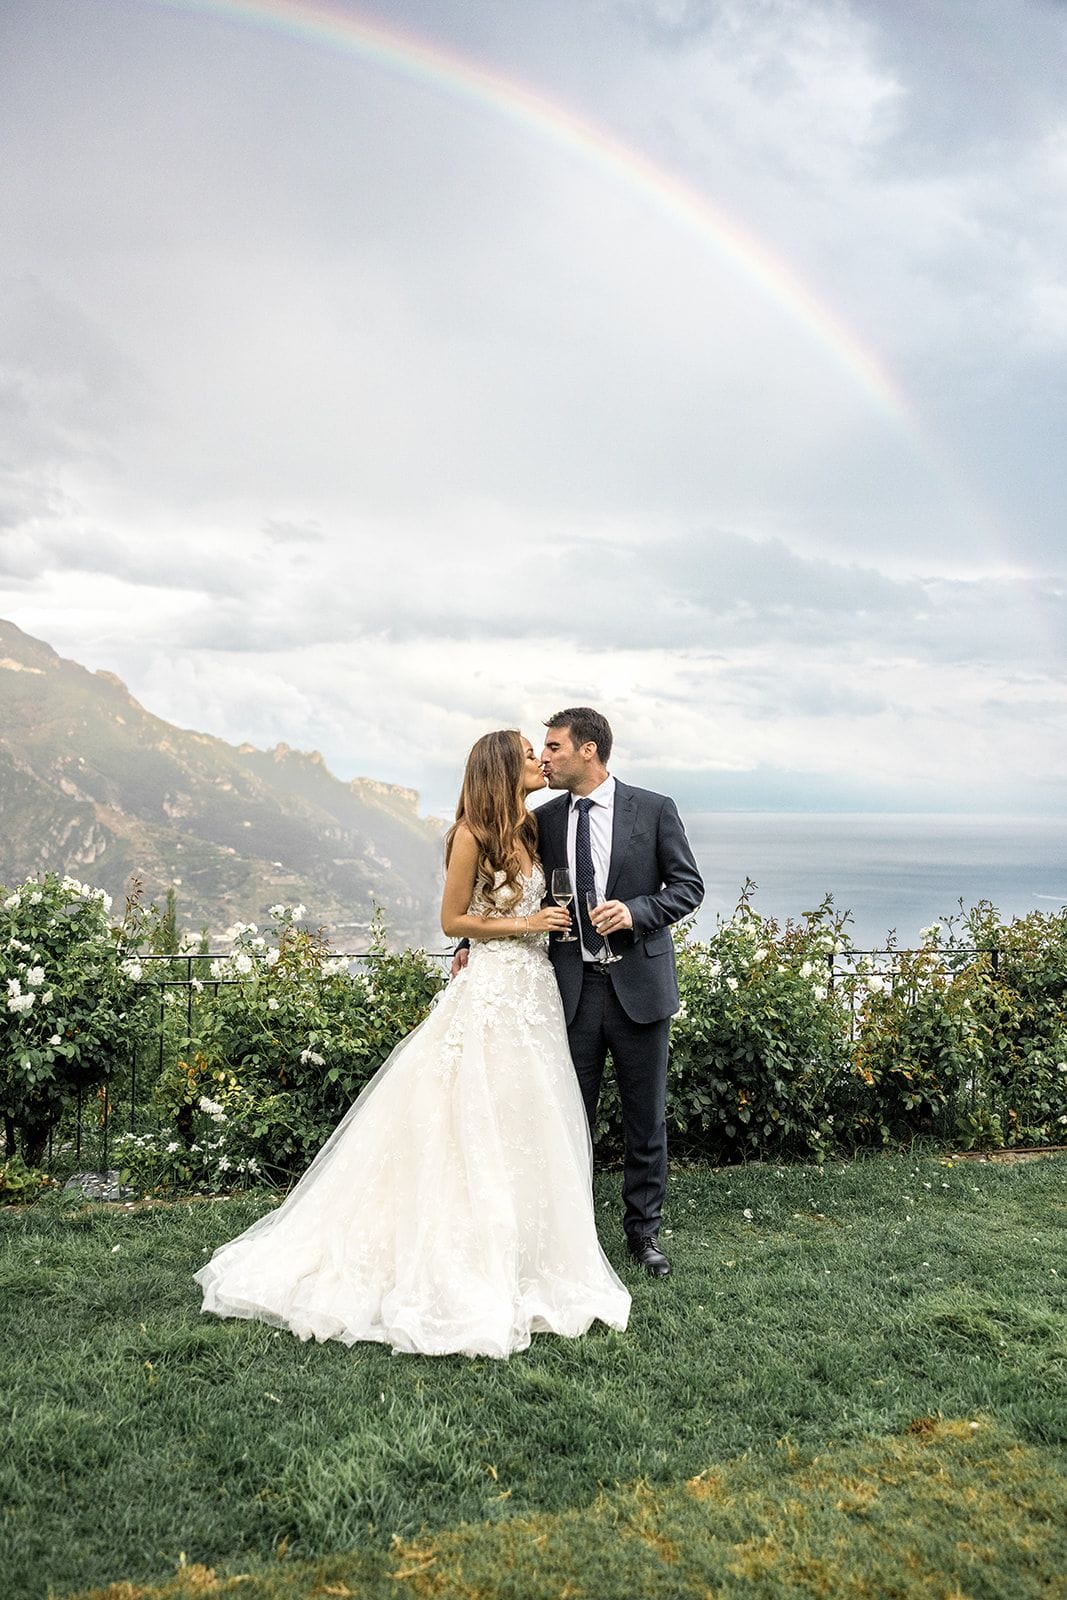 Bride and groom kiss in Ravello Italy with rainbow in background